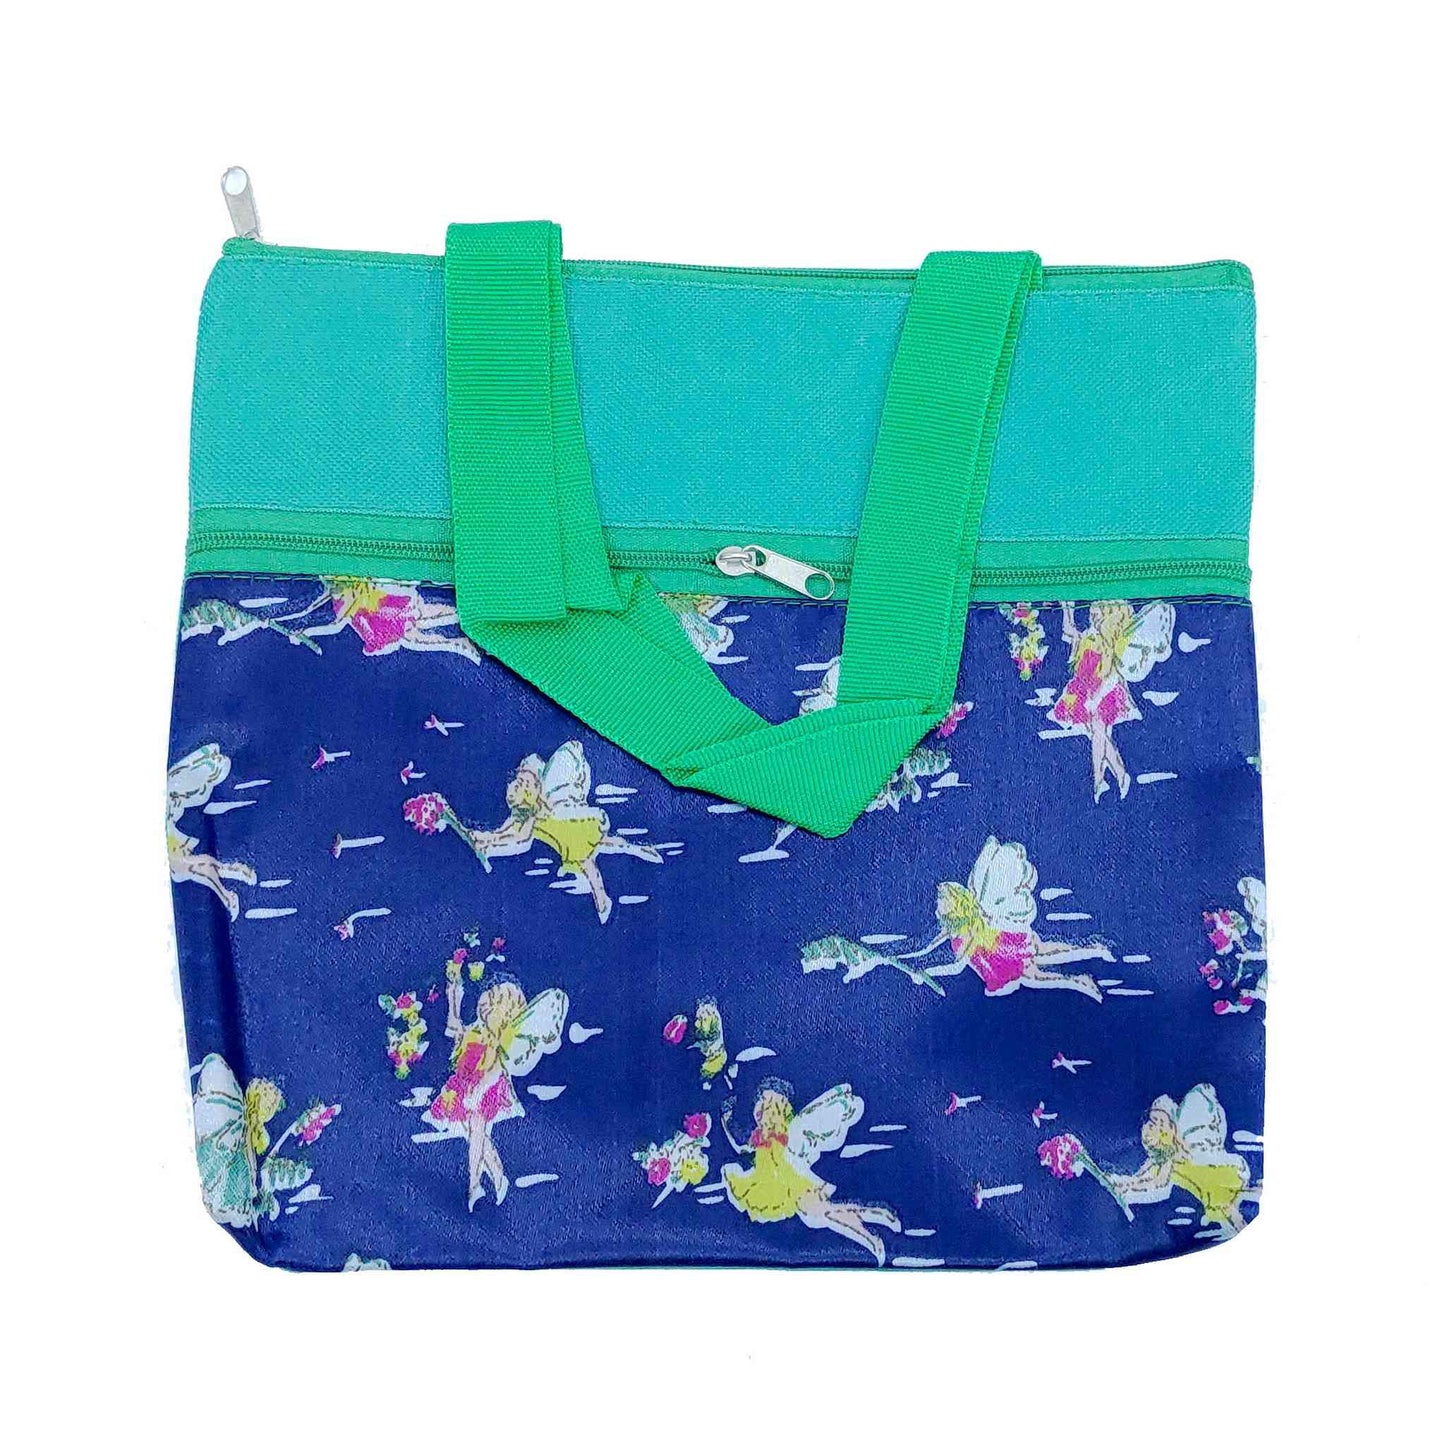 Imported Durable Canvas Printed multi purpose utility Medium size Bag with handles for all occasions for the girls and ladies, Design 1, Green - Indian Petals